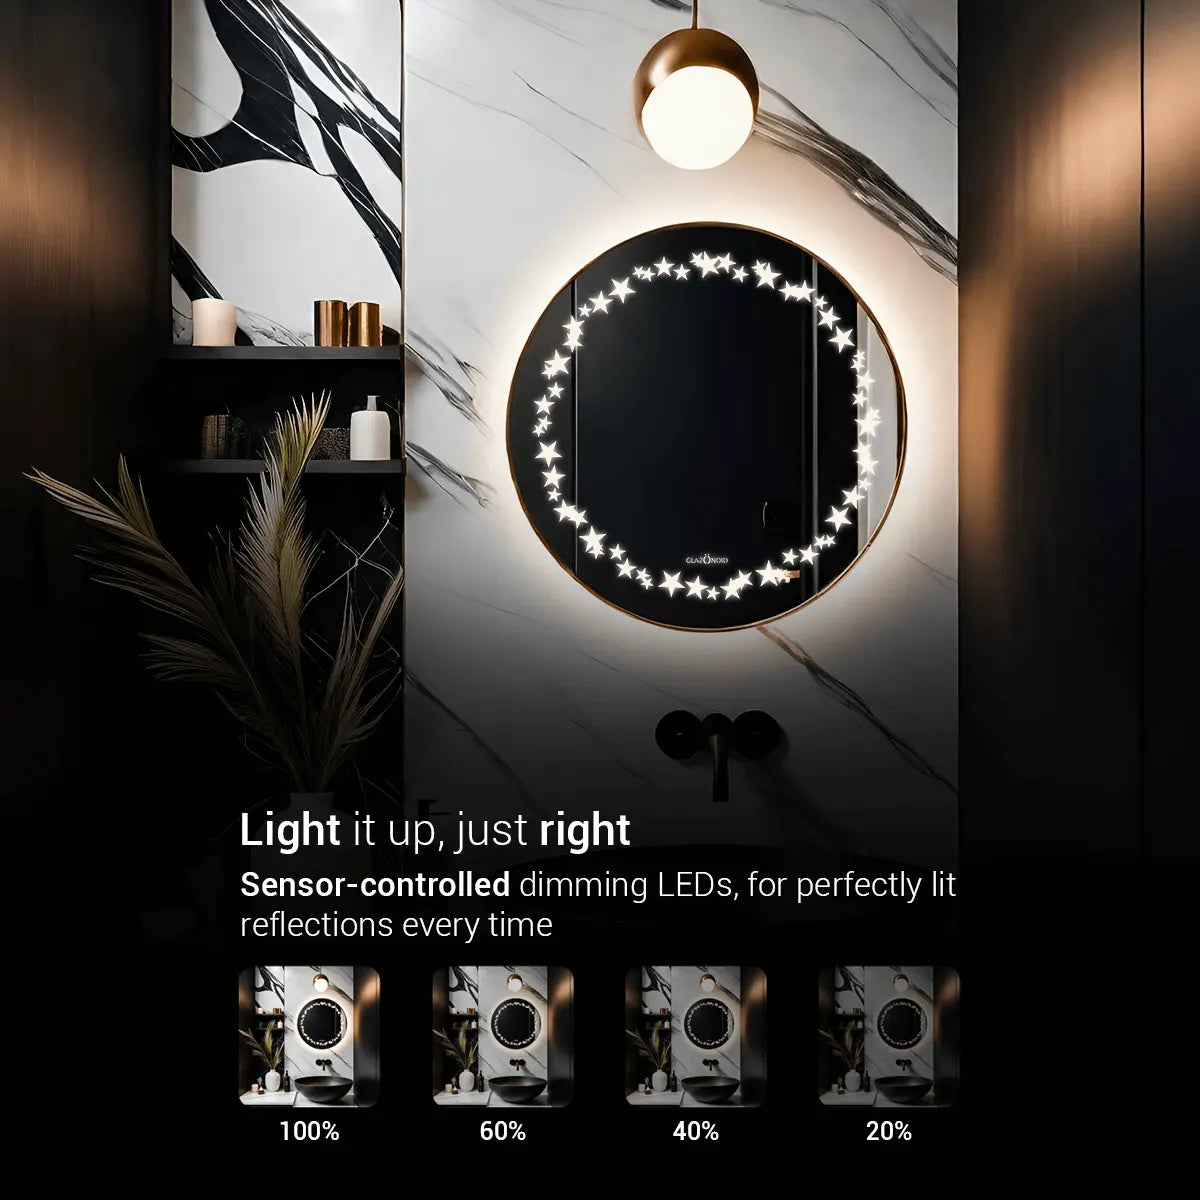 A round bathroom mirror with a built-in circle of star-shaped LED lights. The light is dimmable and sensor-controlled. Text on the mirror says 'Light it up, just right,' with dimming percentages below it.